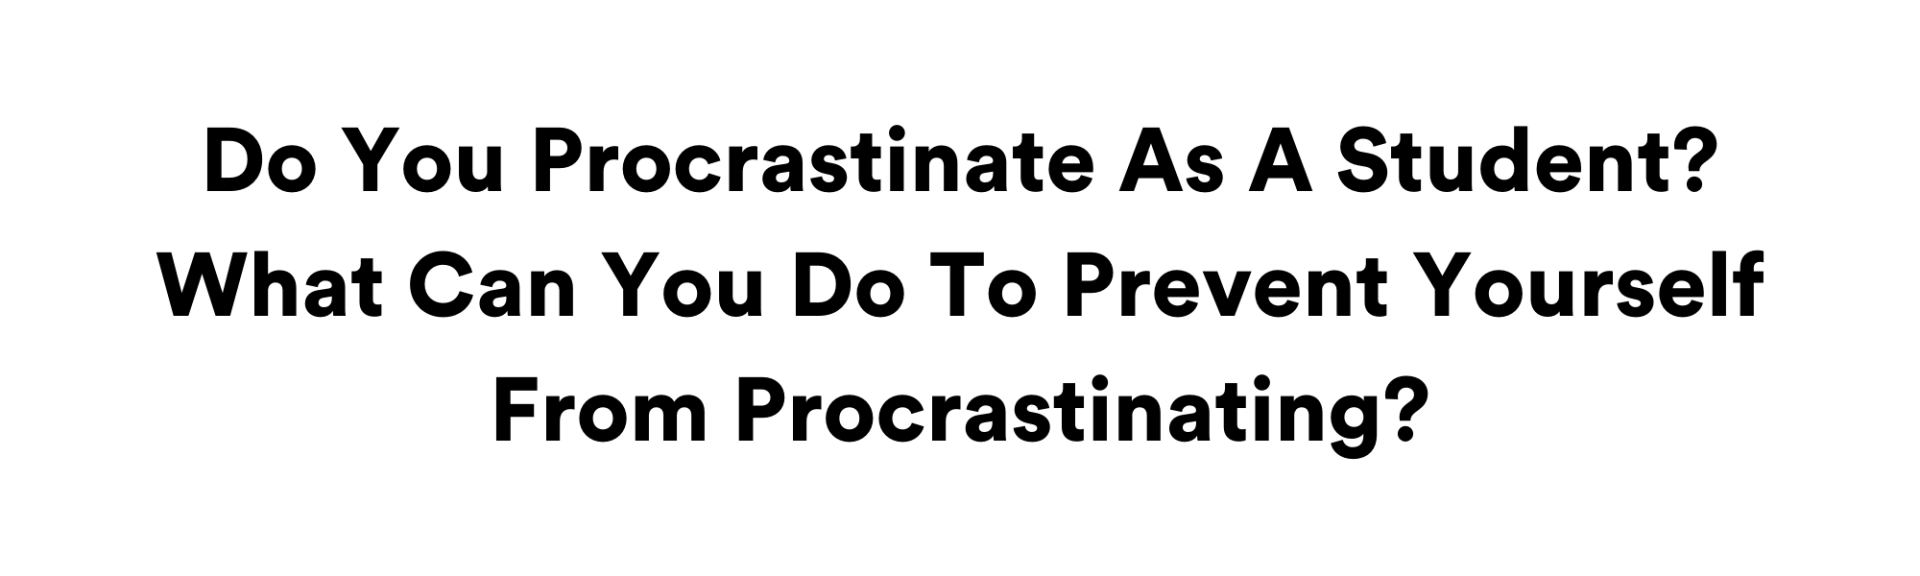 Do You Procrastinate As A Student? What Can You Do To Prevent Yourself From Procrastinating?